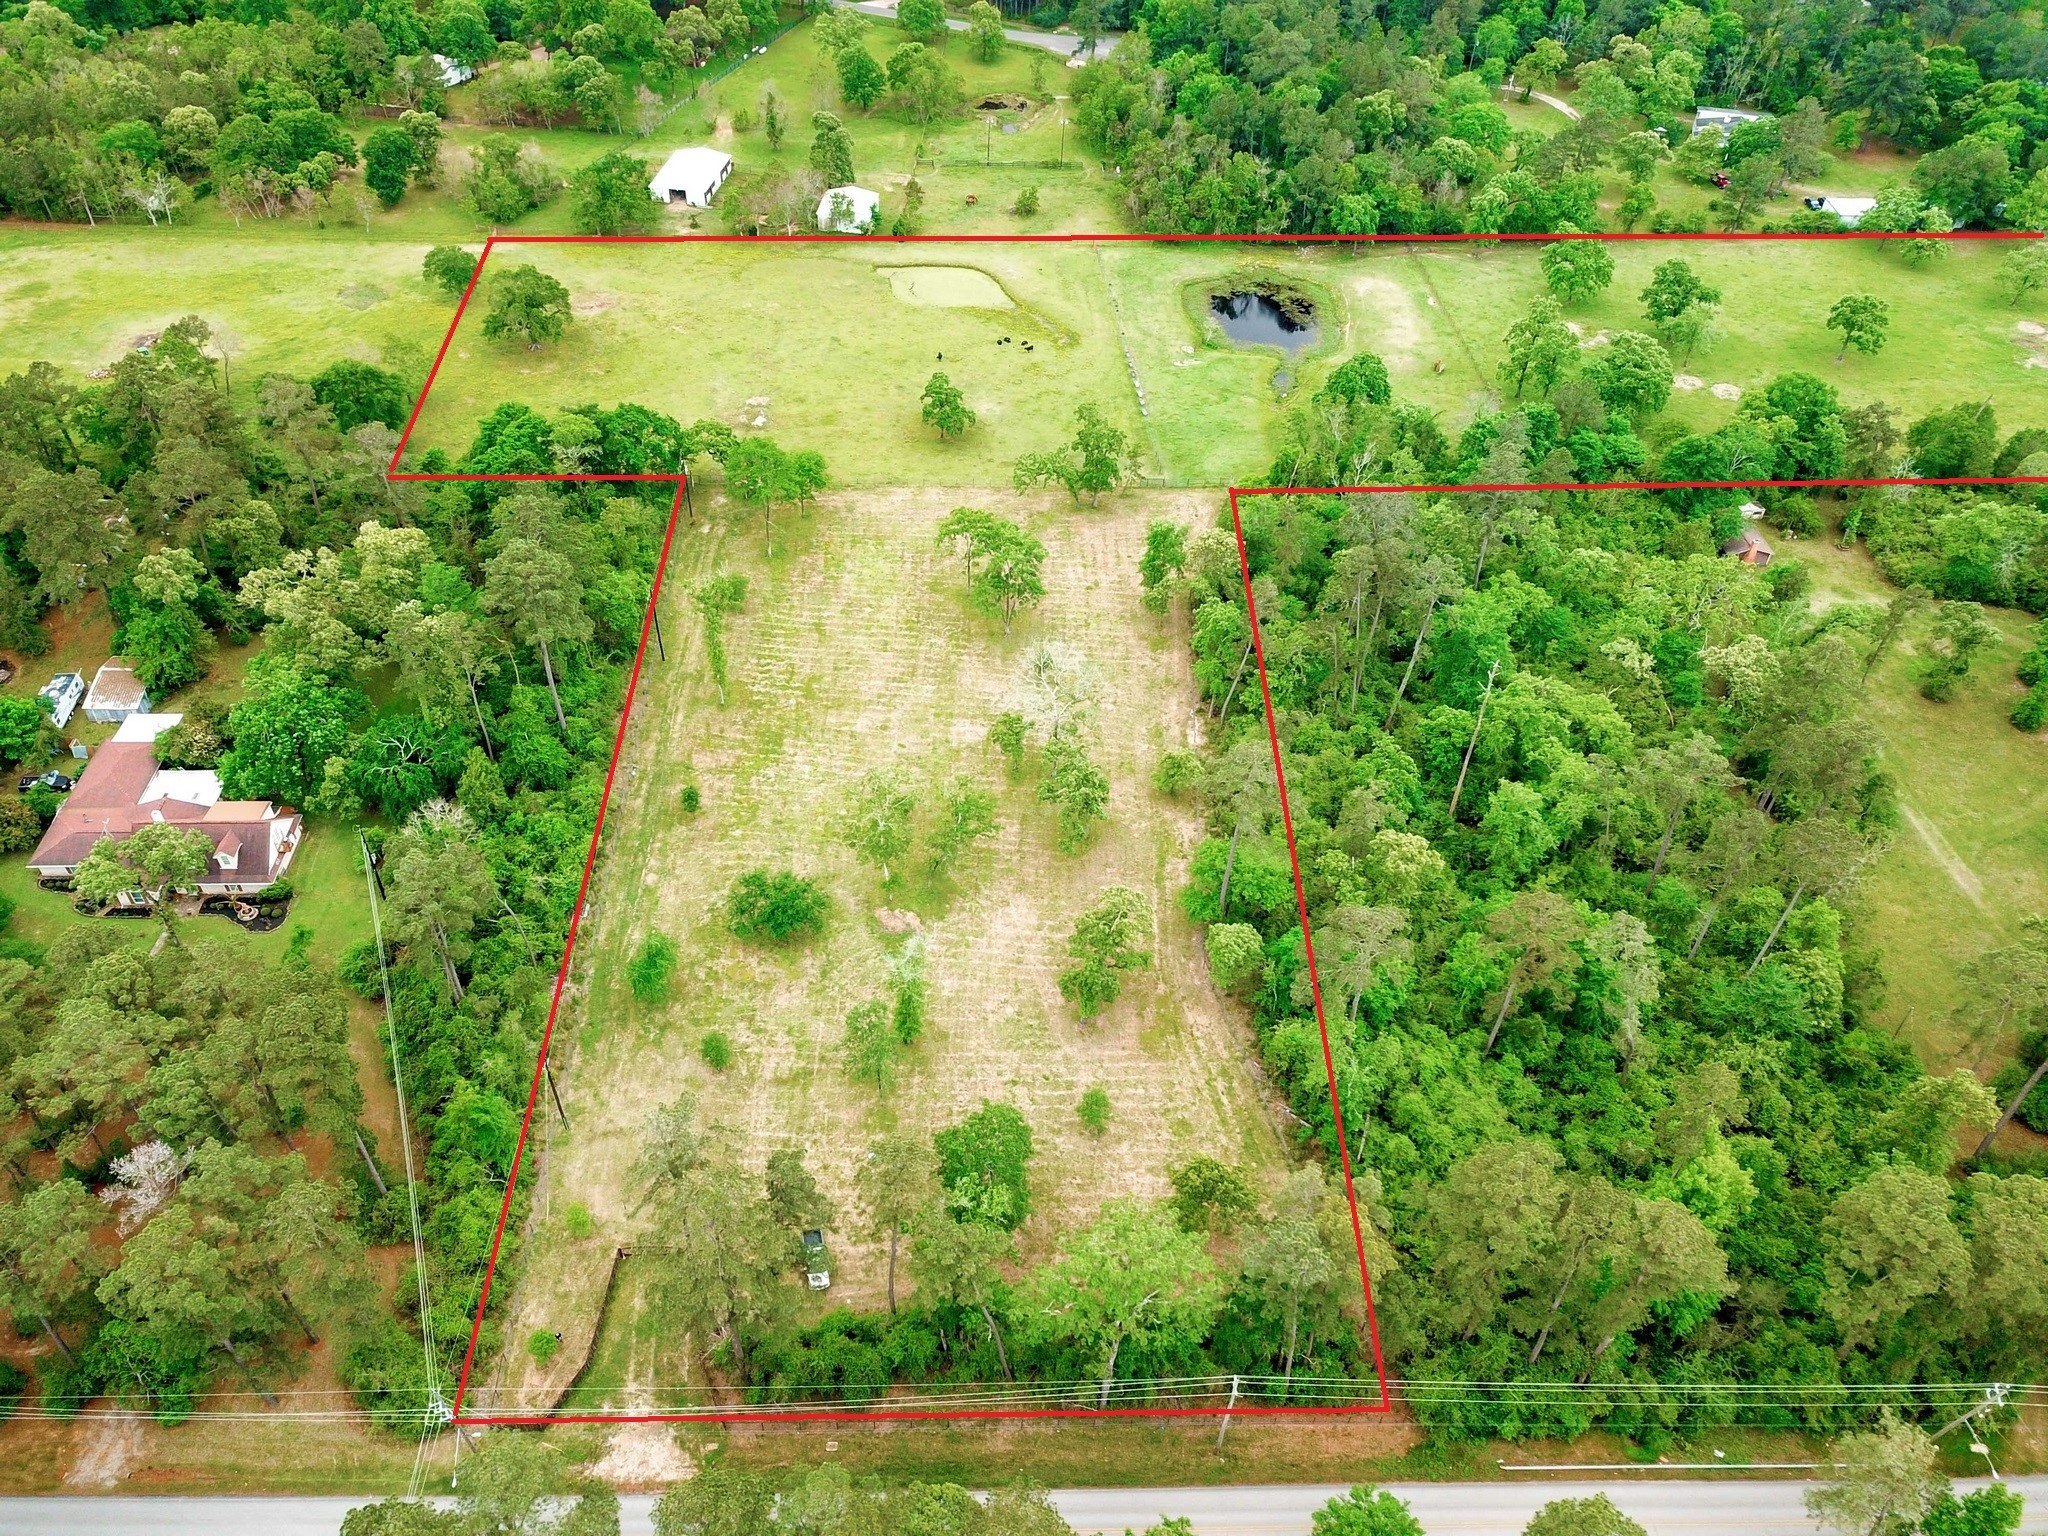 Overview of additional acreage for total purchase of up to 11 acres.
